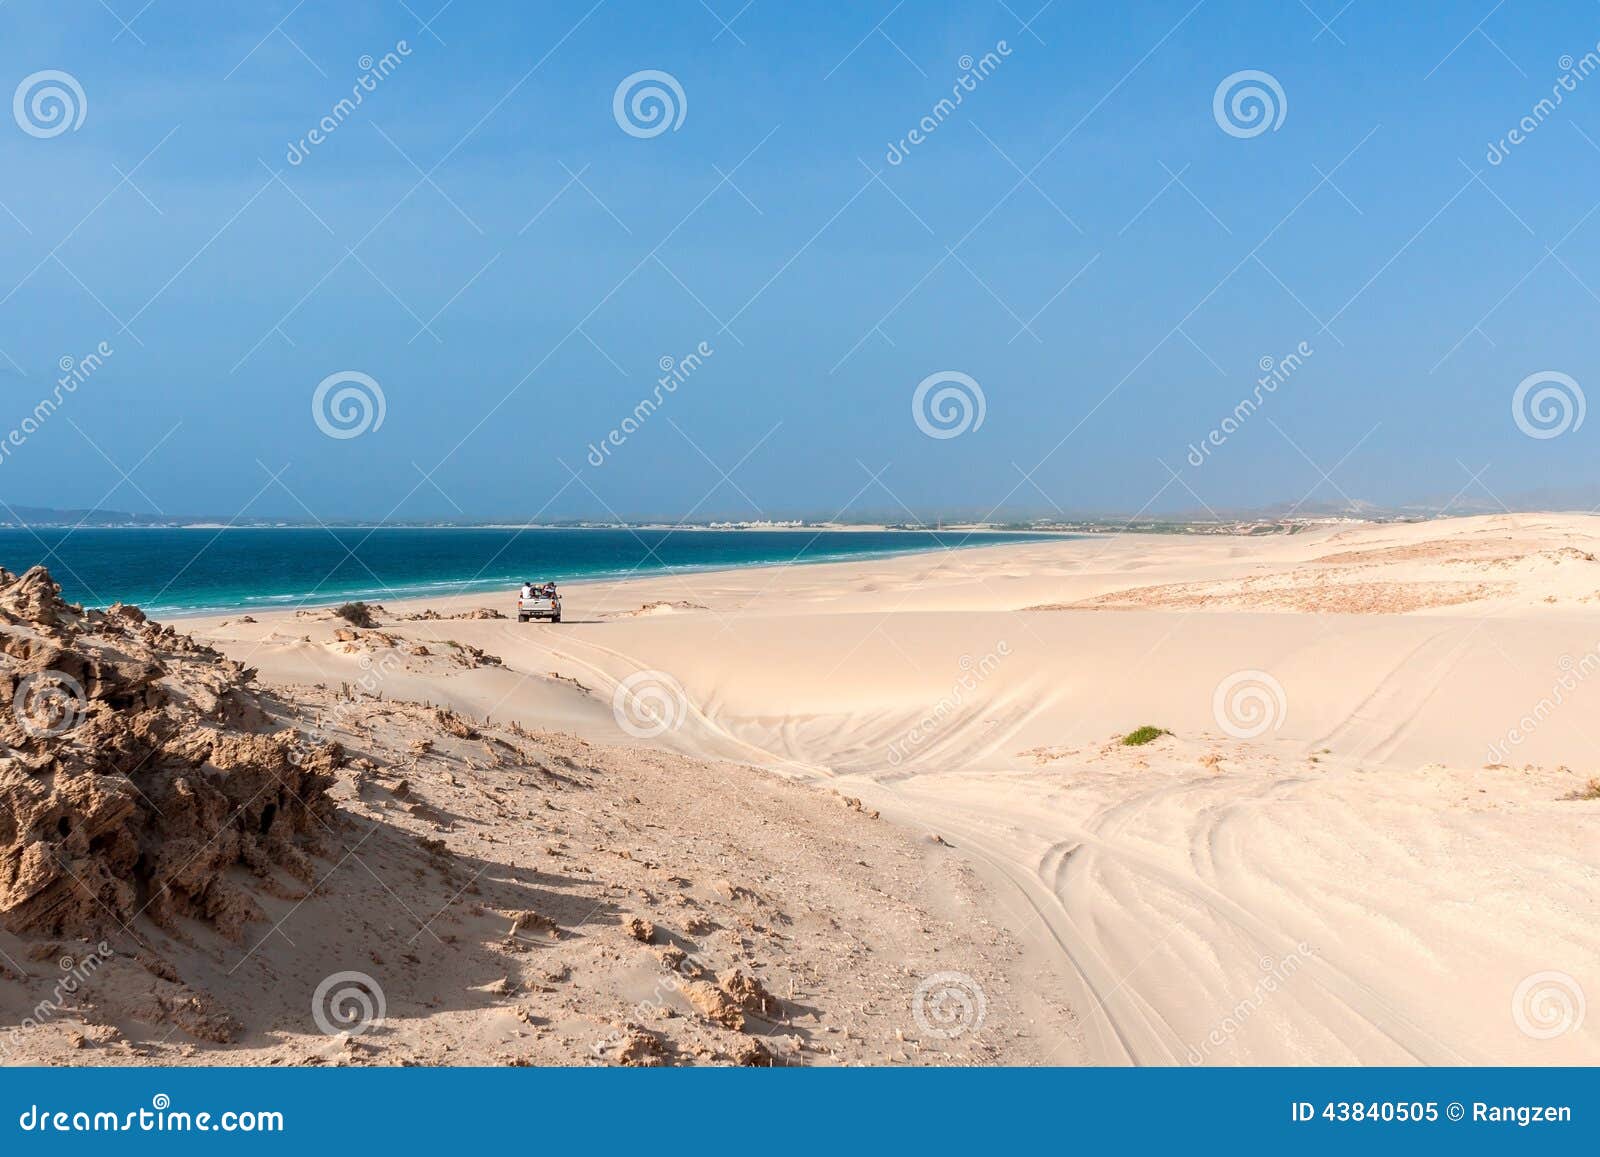 jeeptour in the dunes of morro dÃÂ´areia, boavista, kapverden with